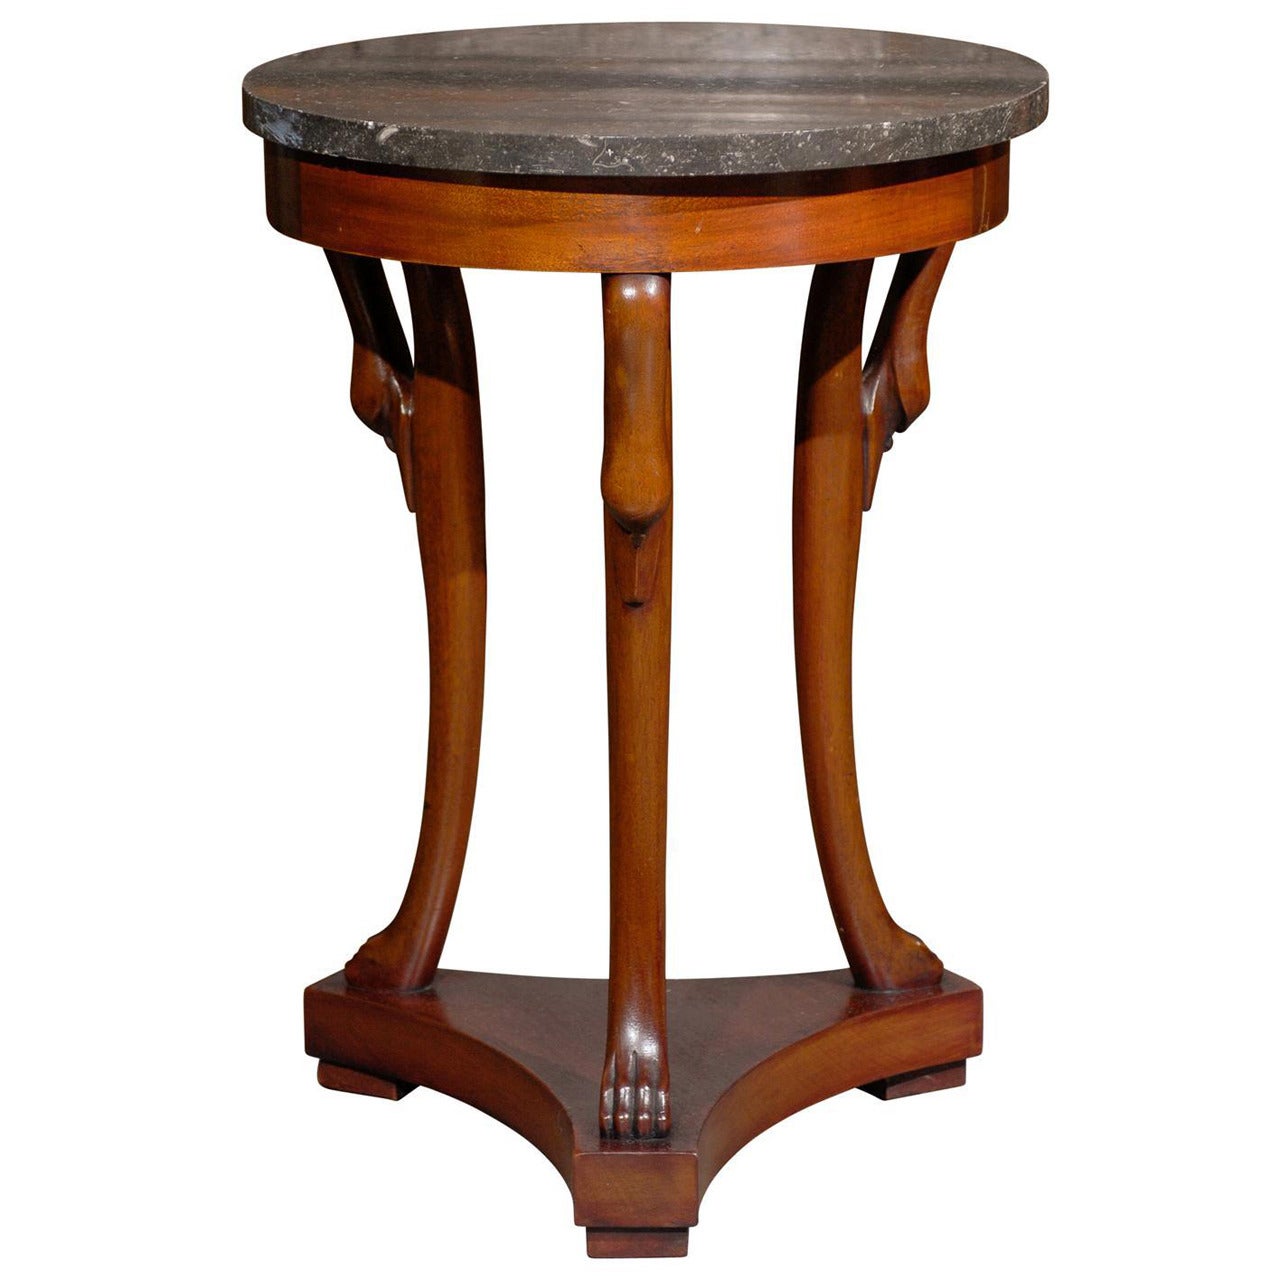 French Directoire Style Marble Top Guéridon Table from the Late 19th Century